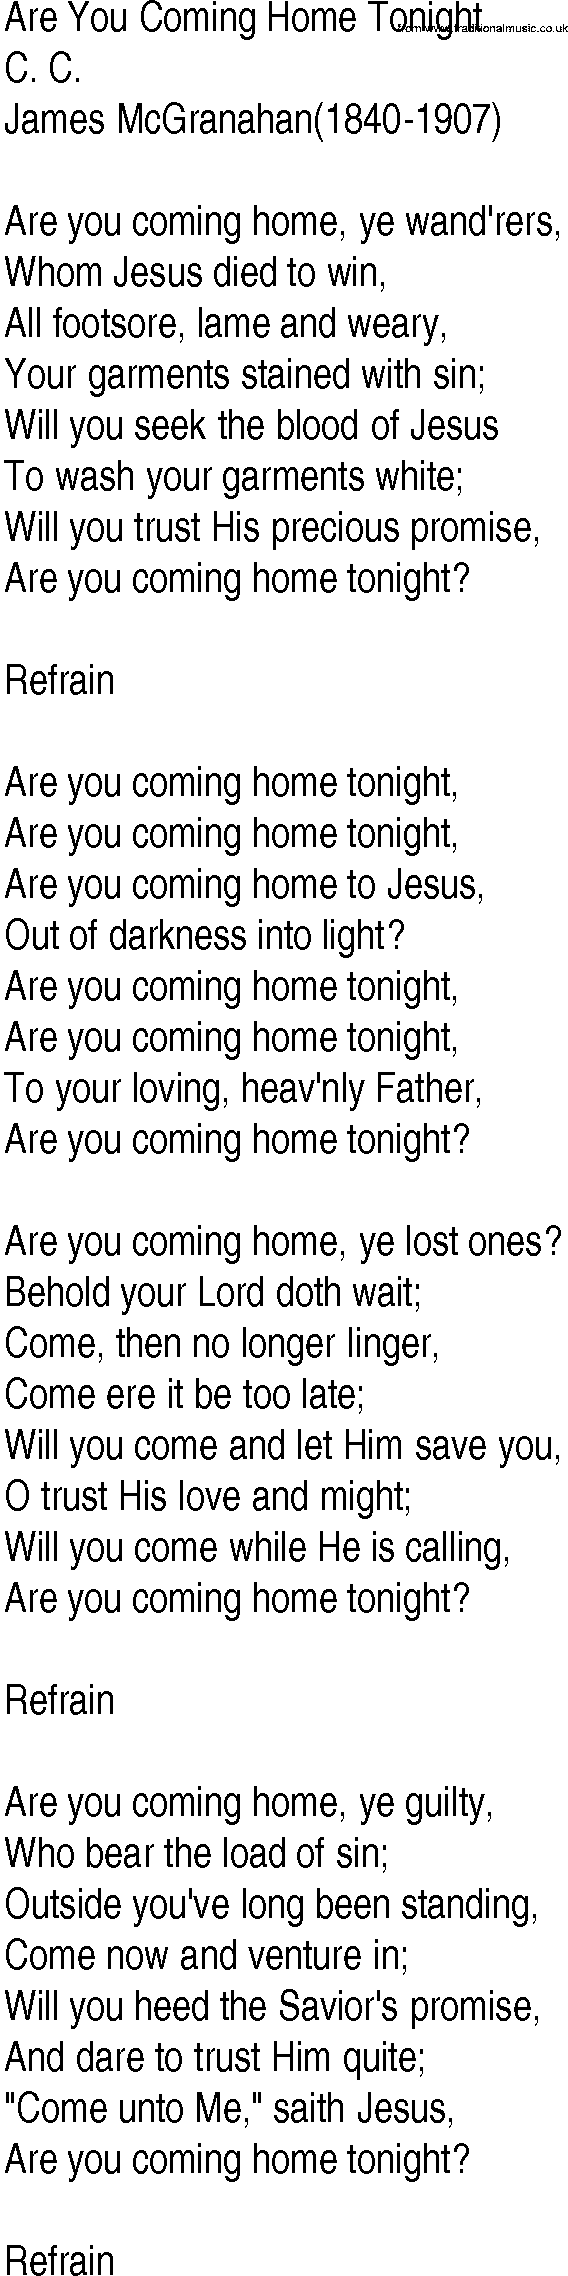 Hymn and Gospel Song: Are You Coming Home Tonight by C C lyrics